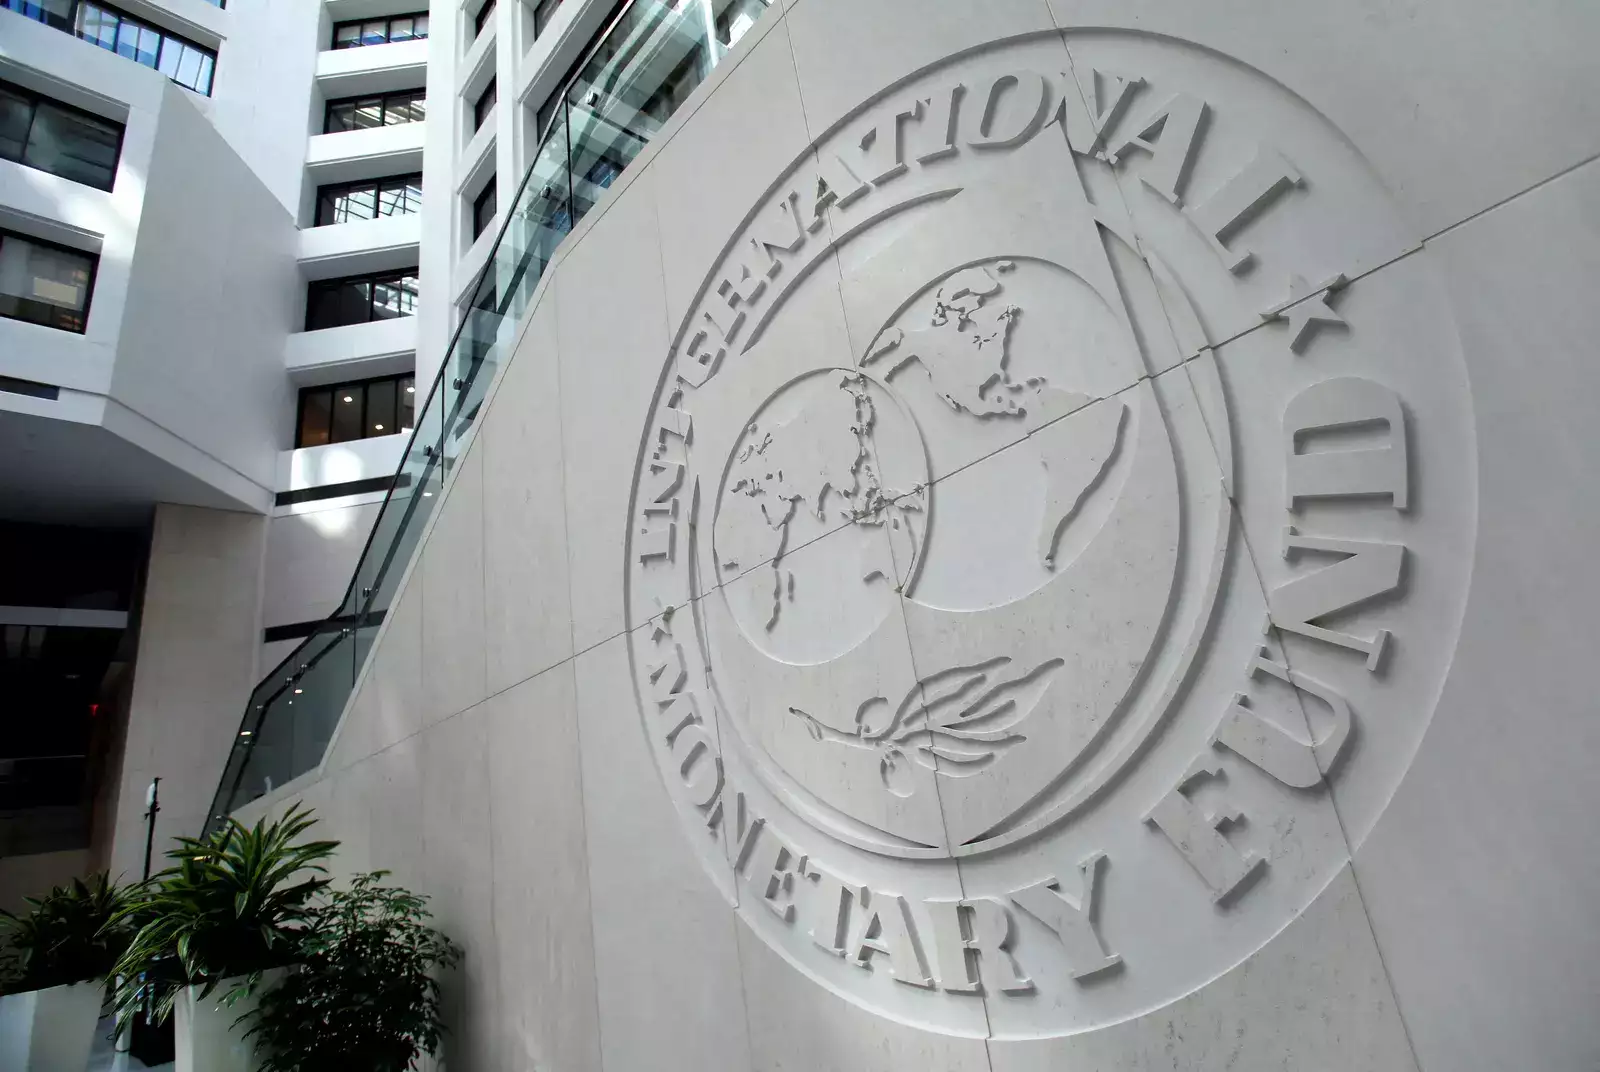 Global economic fallout of the war in Ukraine is expected to negatively impact Indian economy: says IMF